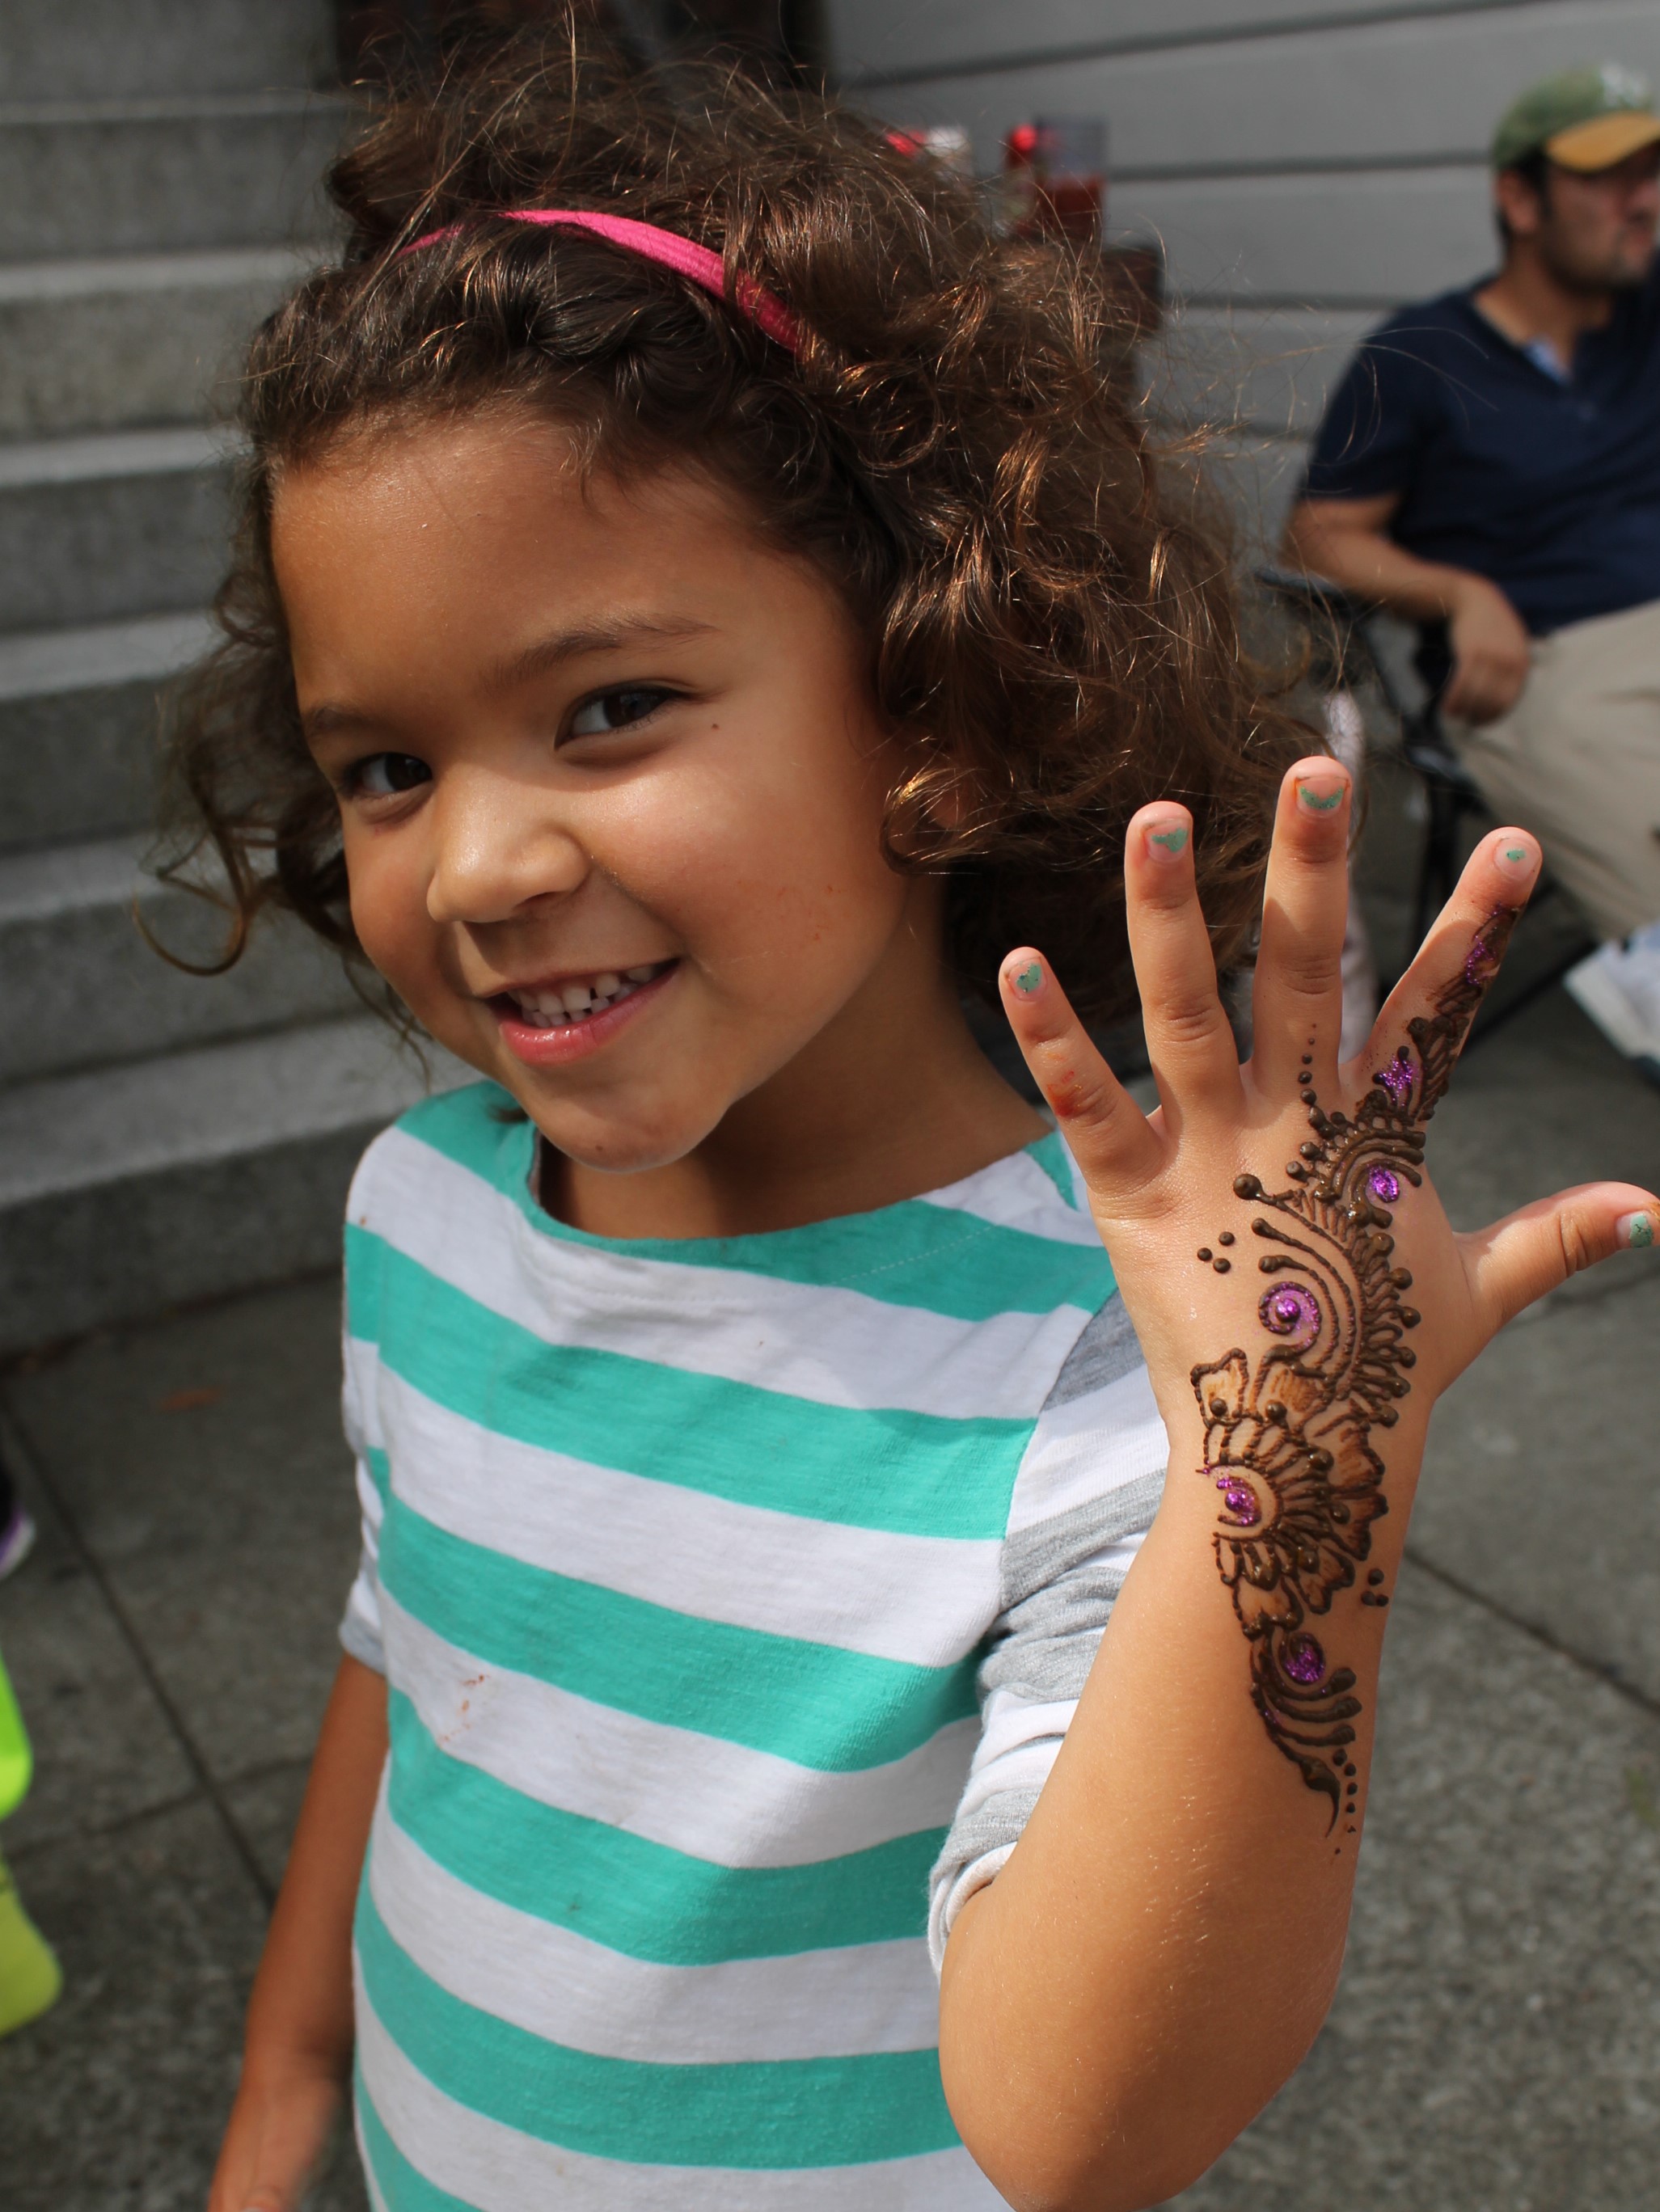 Girl showing off the henna pattern on her hand at an outdoor neighborhood festival